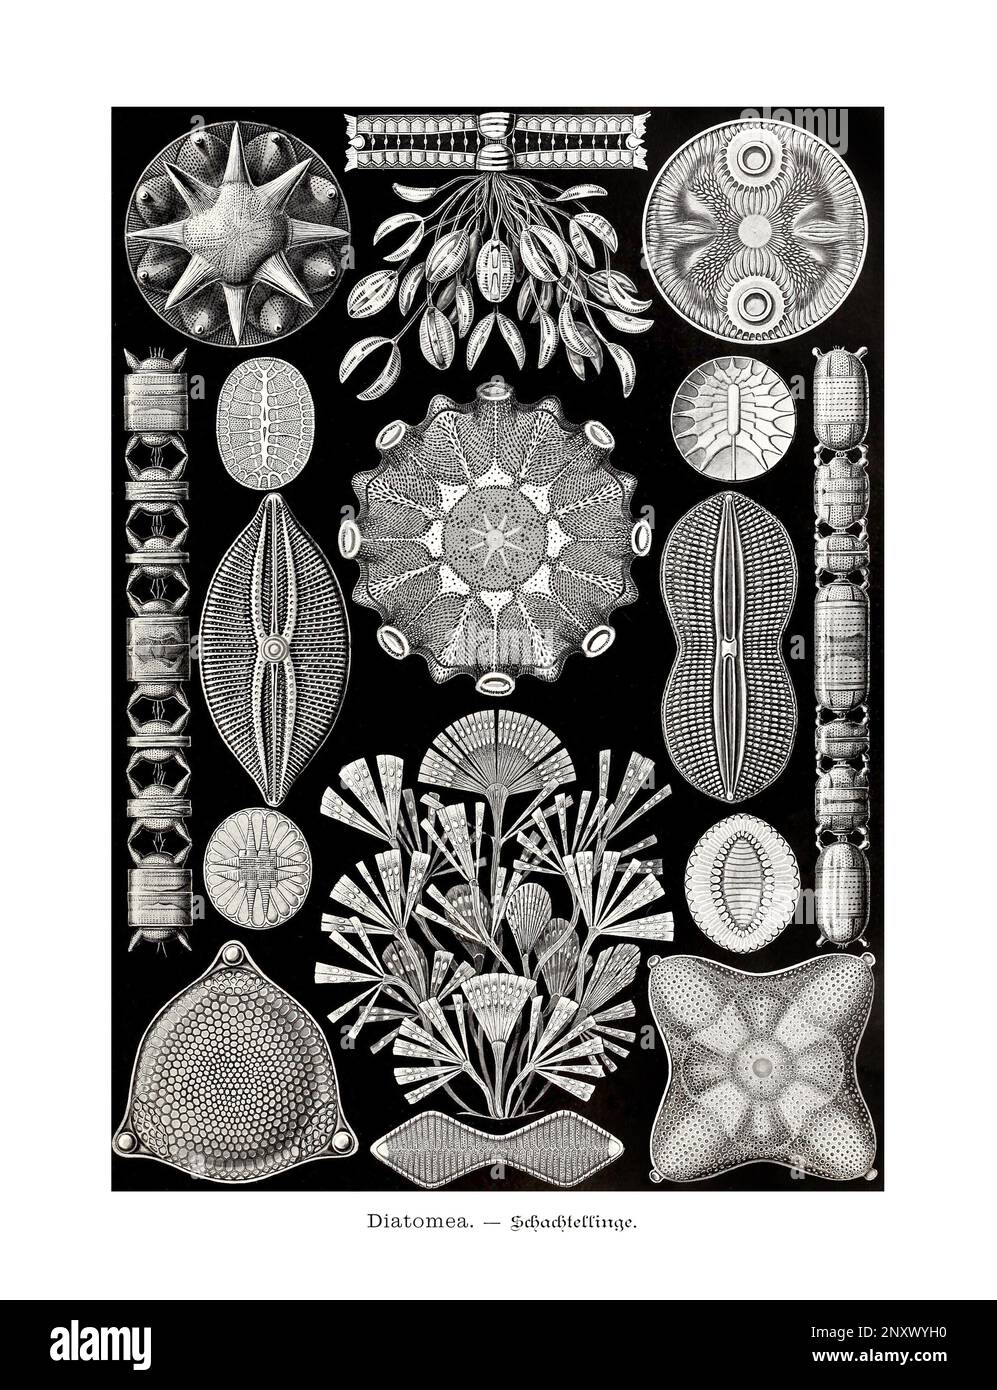 ERNST HAECKEL ART - Diatomea - 19th Century - Antique Zoological illustration - Illustrations of the book : “Art Forms in Nature” Stock Photo